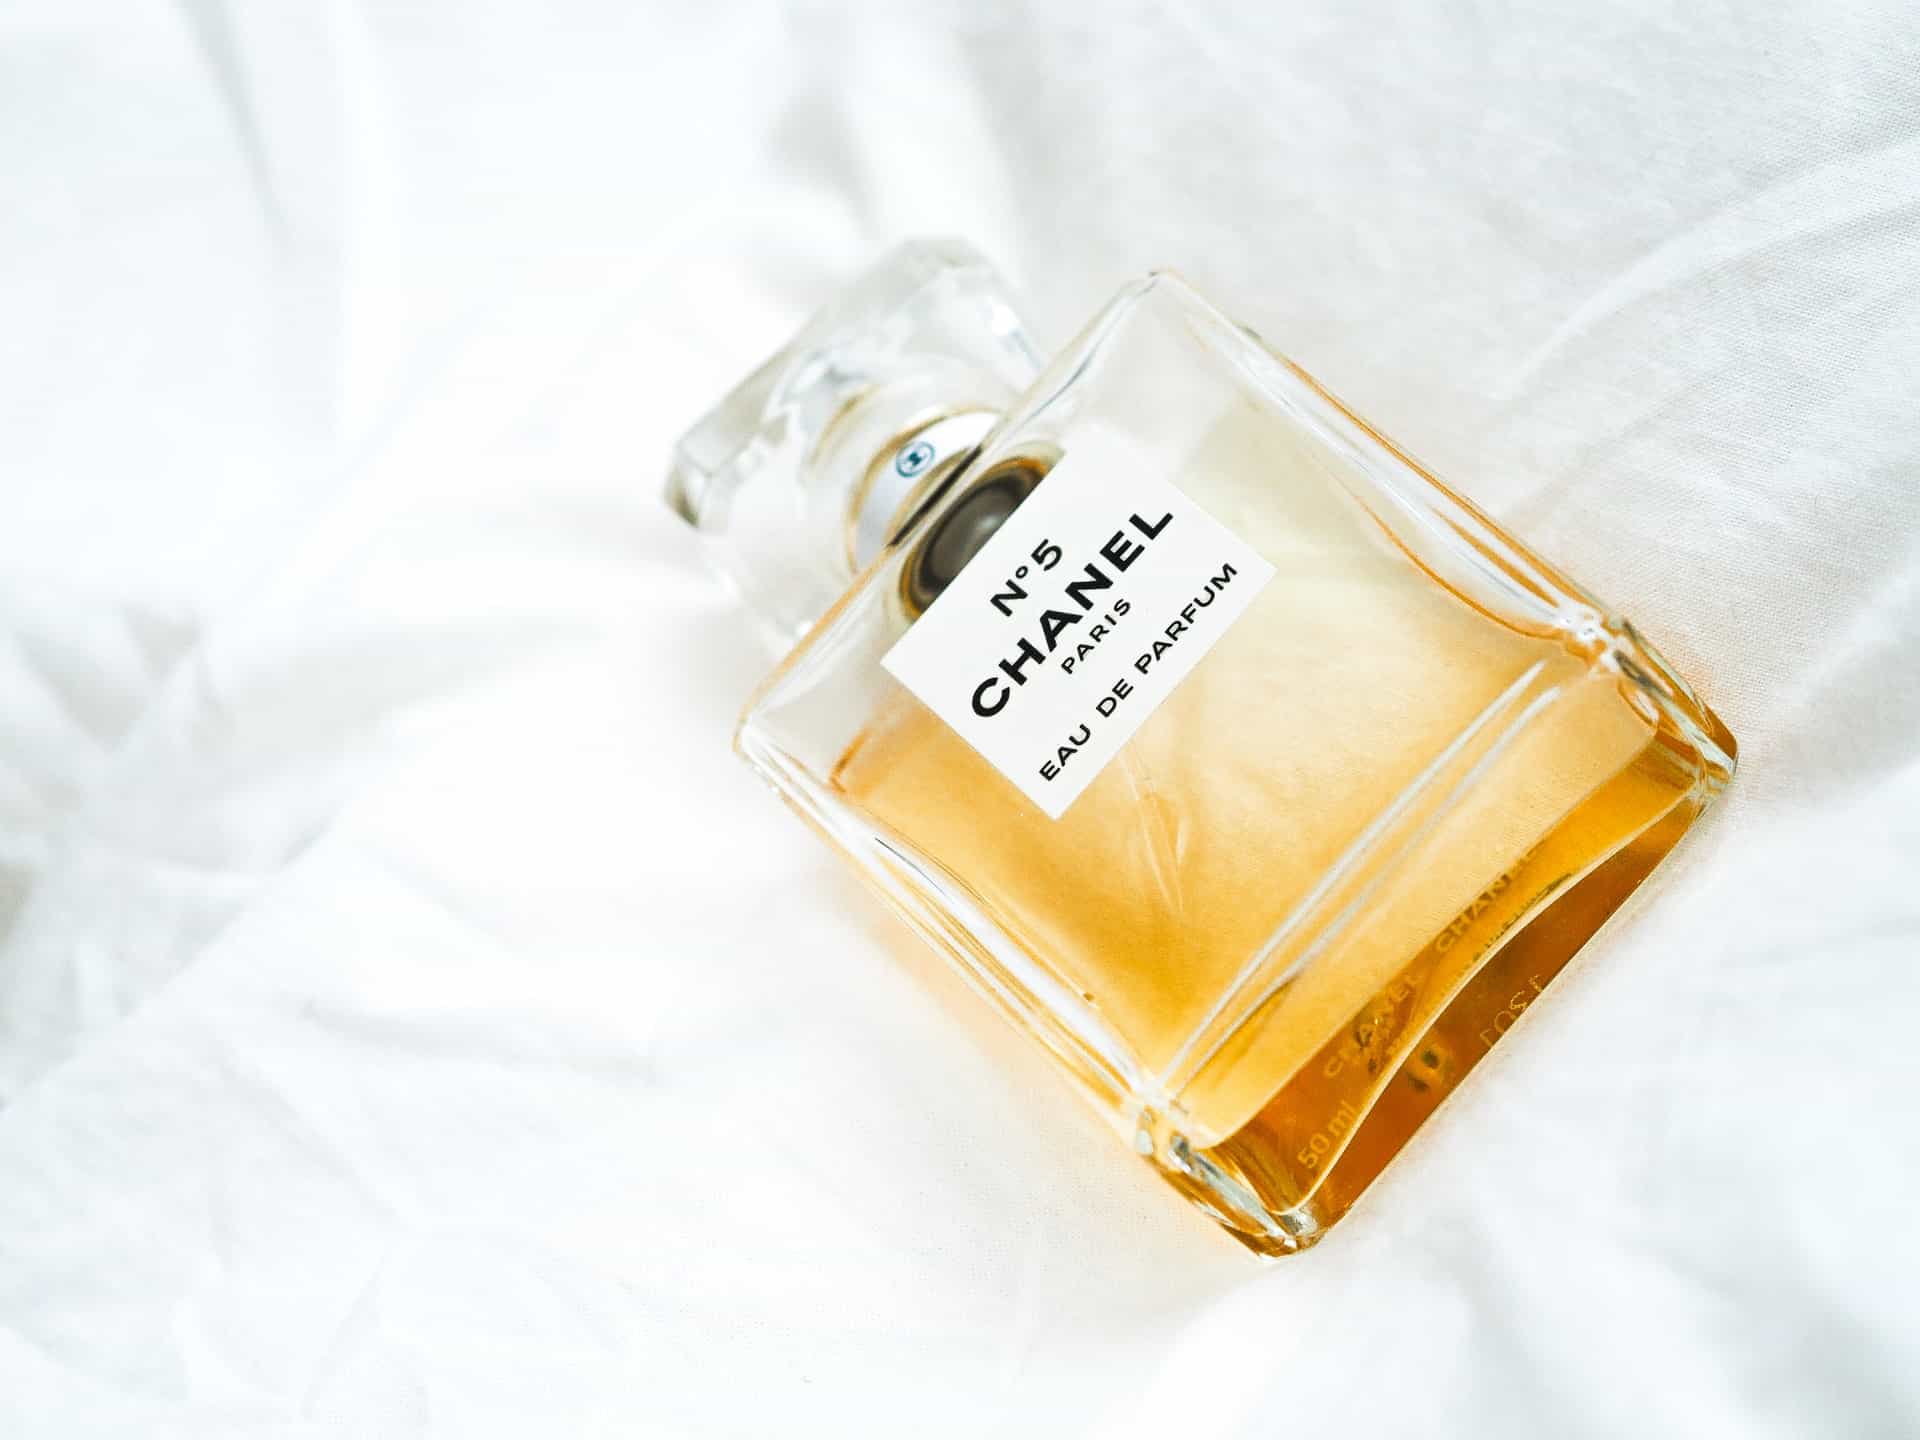 Unisex perfumes – which ones are worth trying?